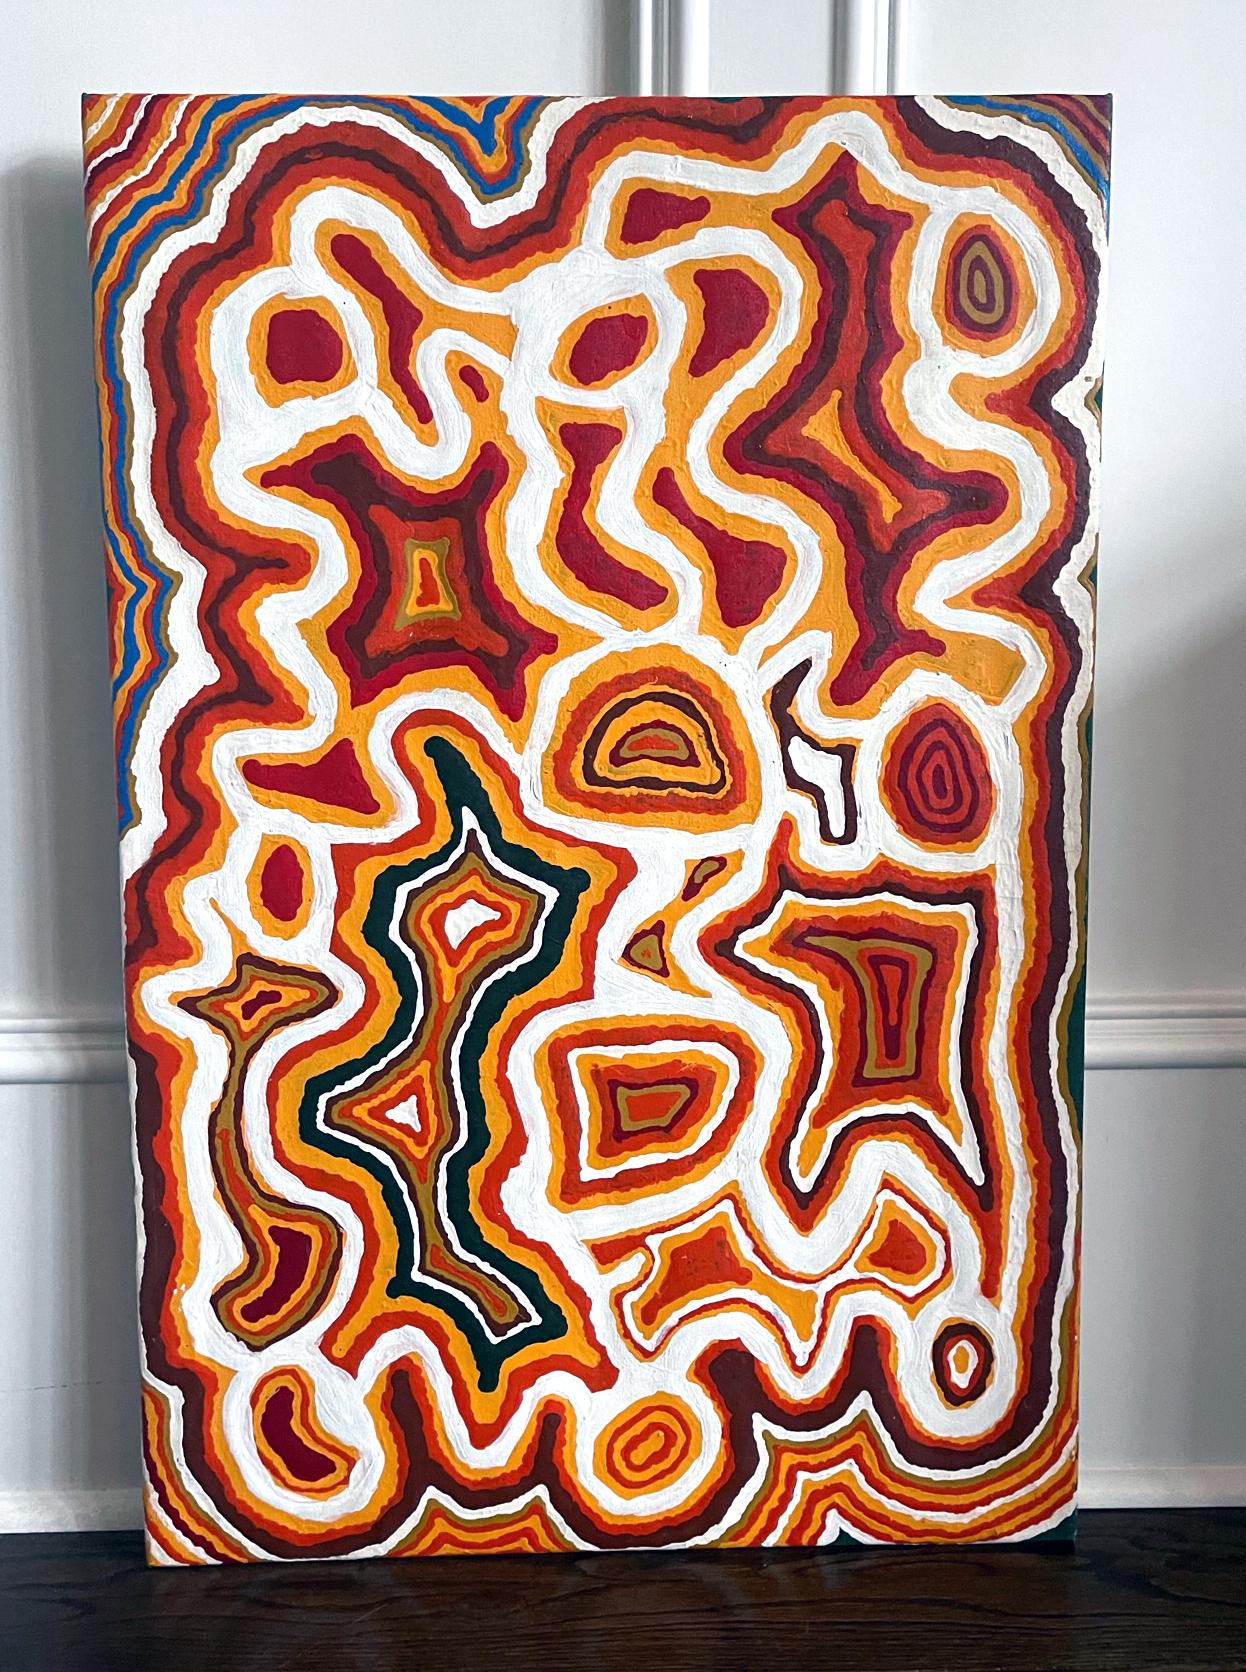 An aboriginal contemporary painting by Australian artist Ningie Nangala (born 1938-). The colorful canvas depicts the artist's ancestral country called Nawilyi in the Great Sandy Desert which is dotted with salt lakes. The green encircled area on